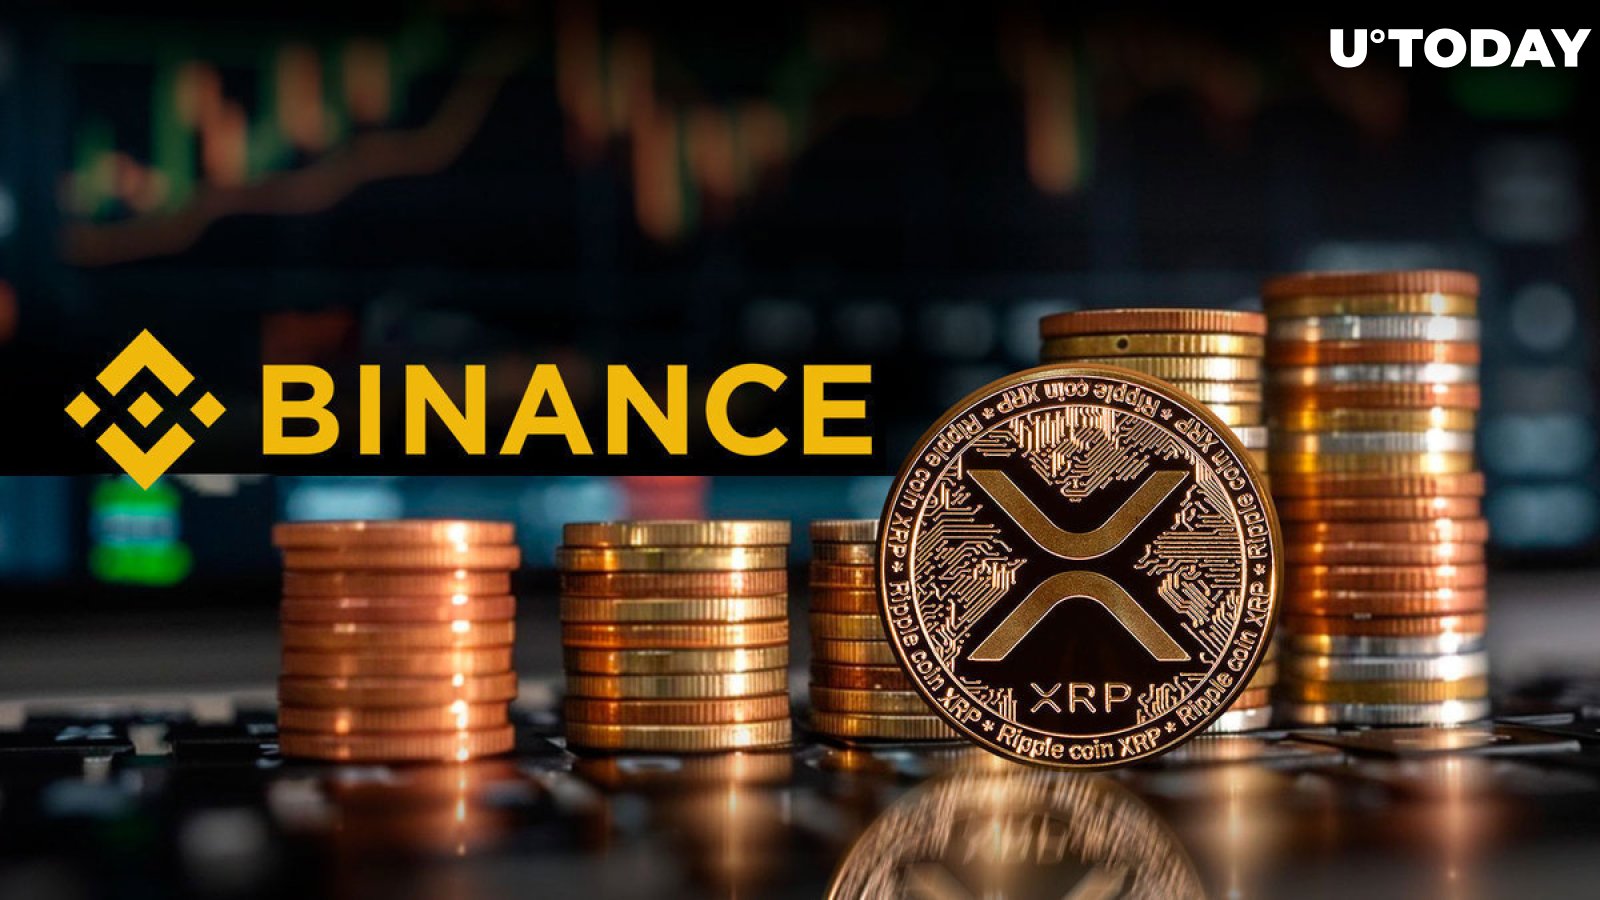 92 Million XRP Withdrawn From Binance as Price Jumps – What's Happening?